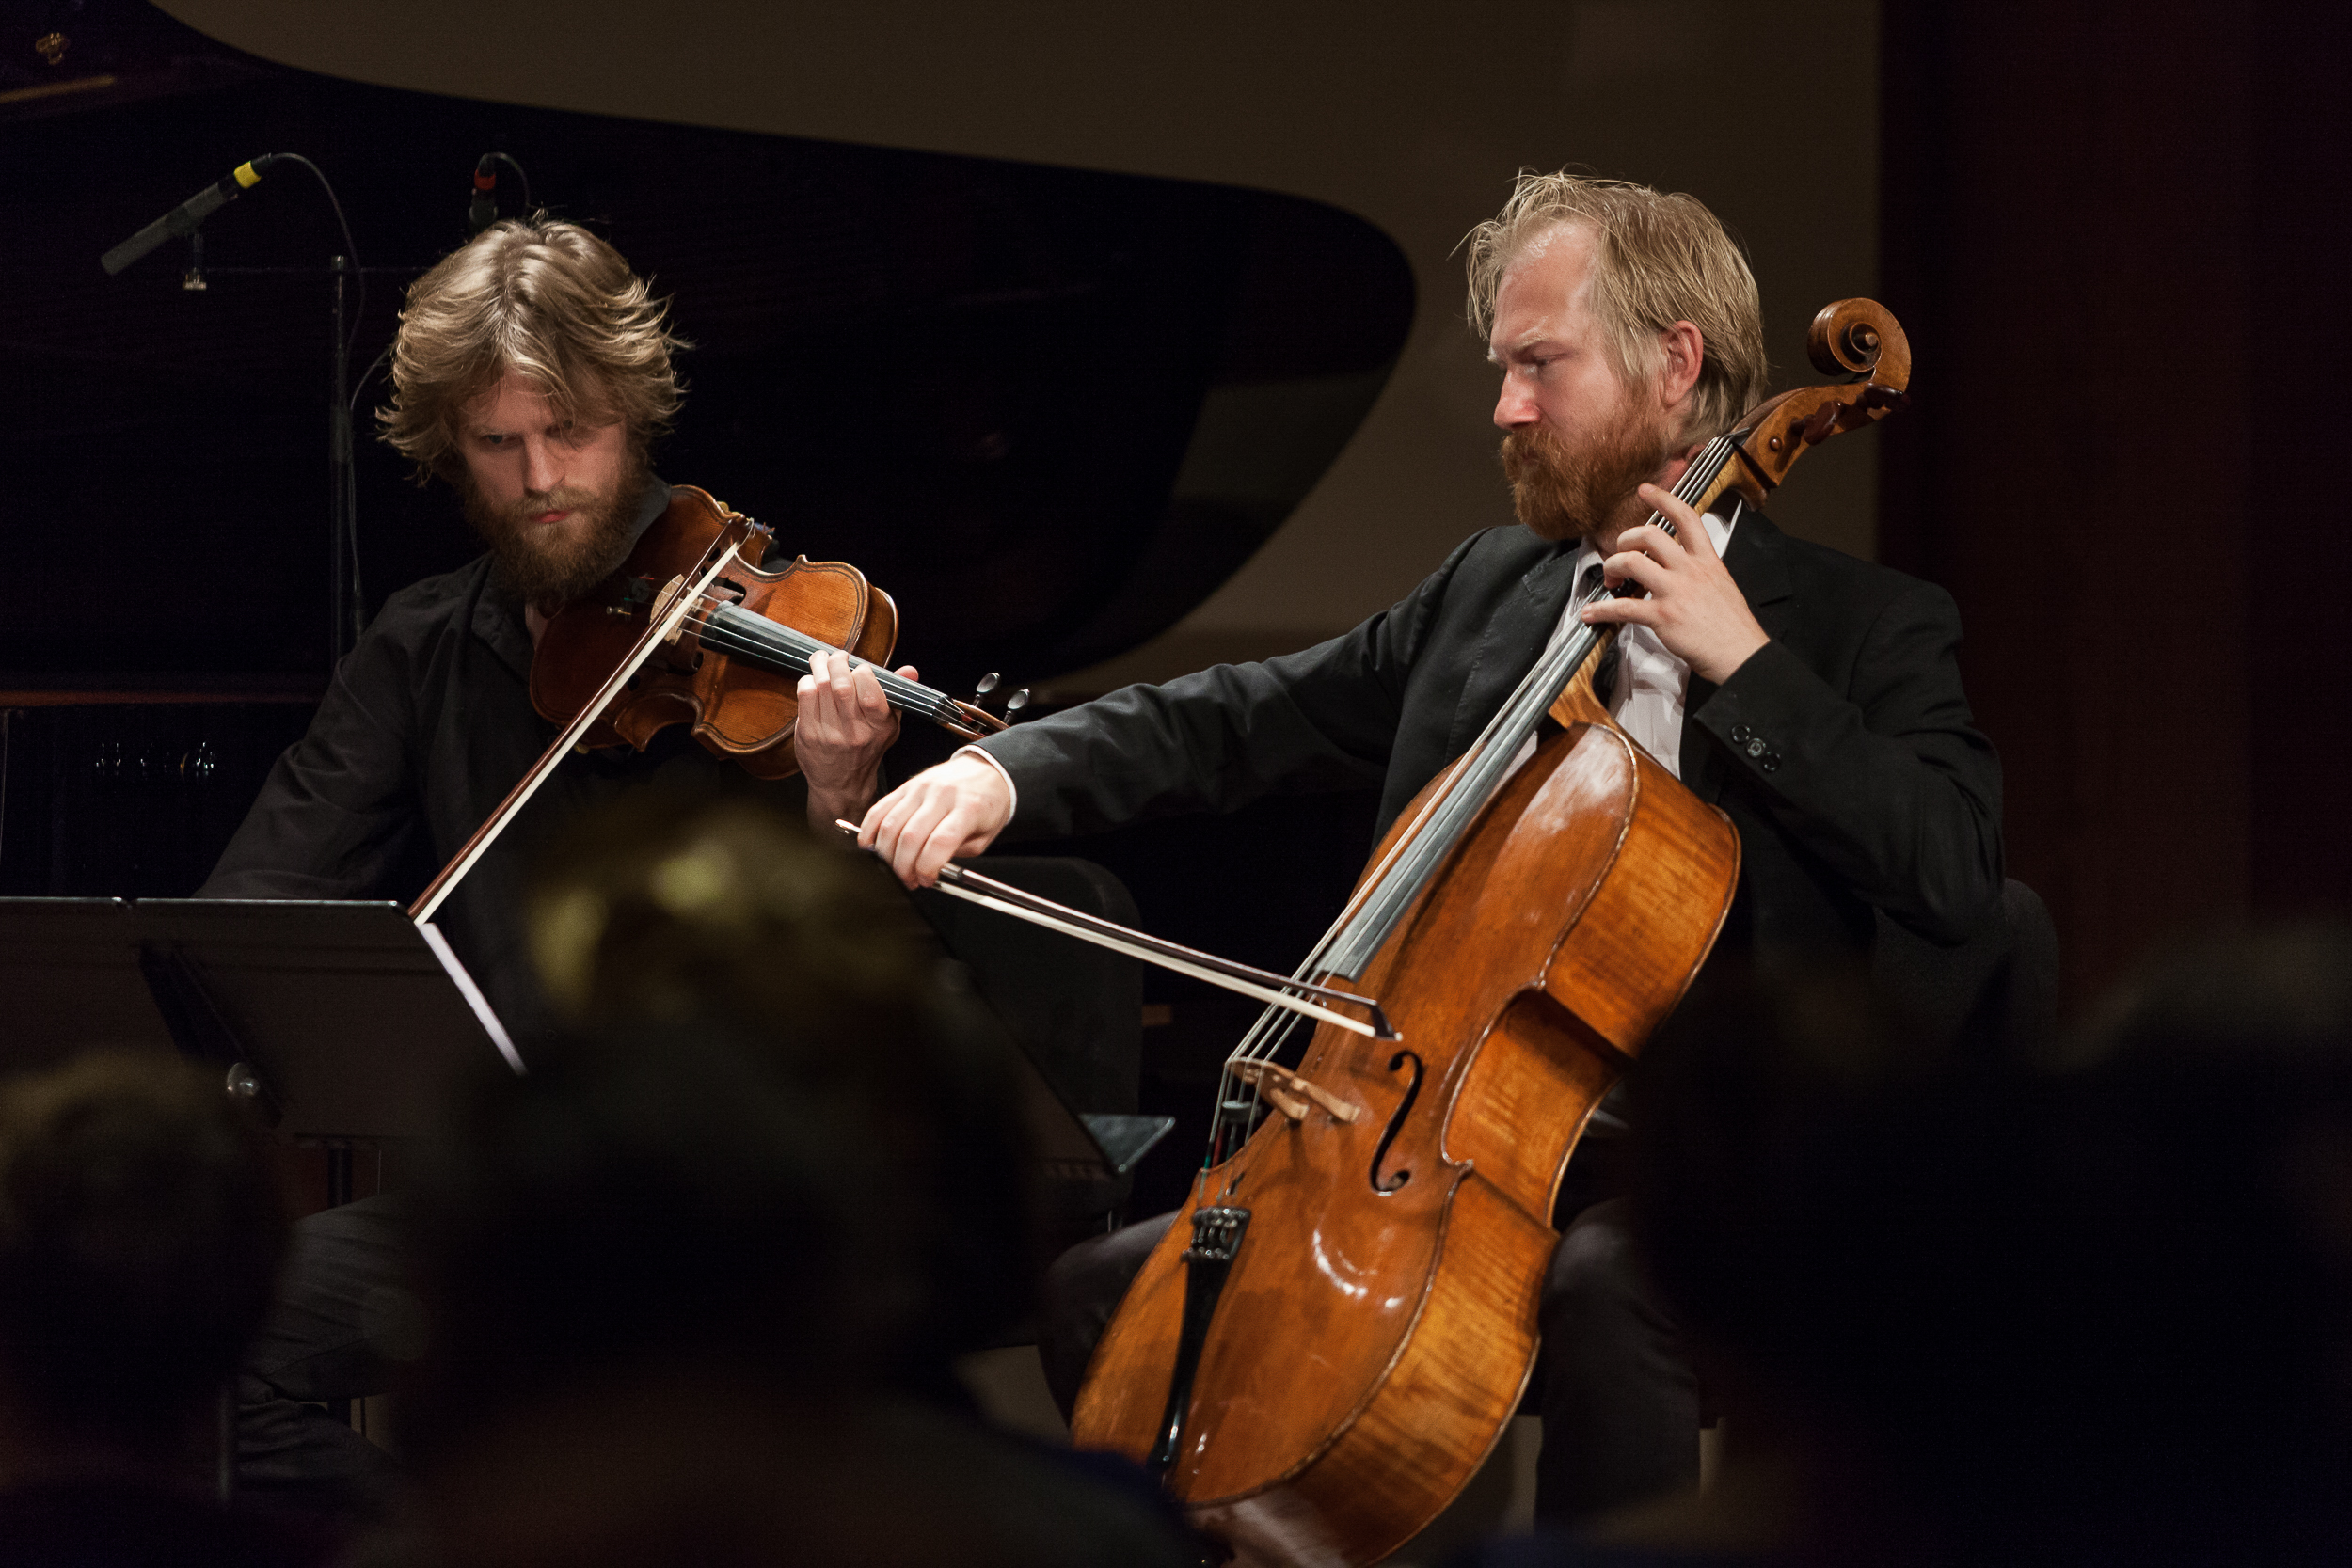  Members of the  Danish String Quartet  perform as part of the Late Night Rose concert series, presented by The Chamber Music Society of Lincoln Center. 